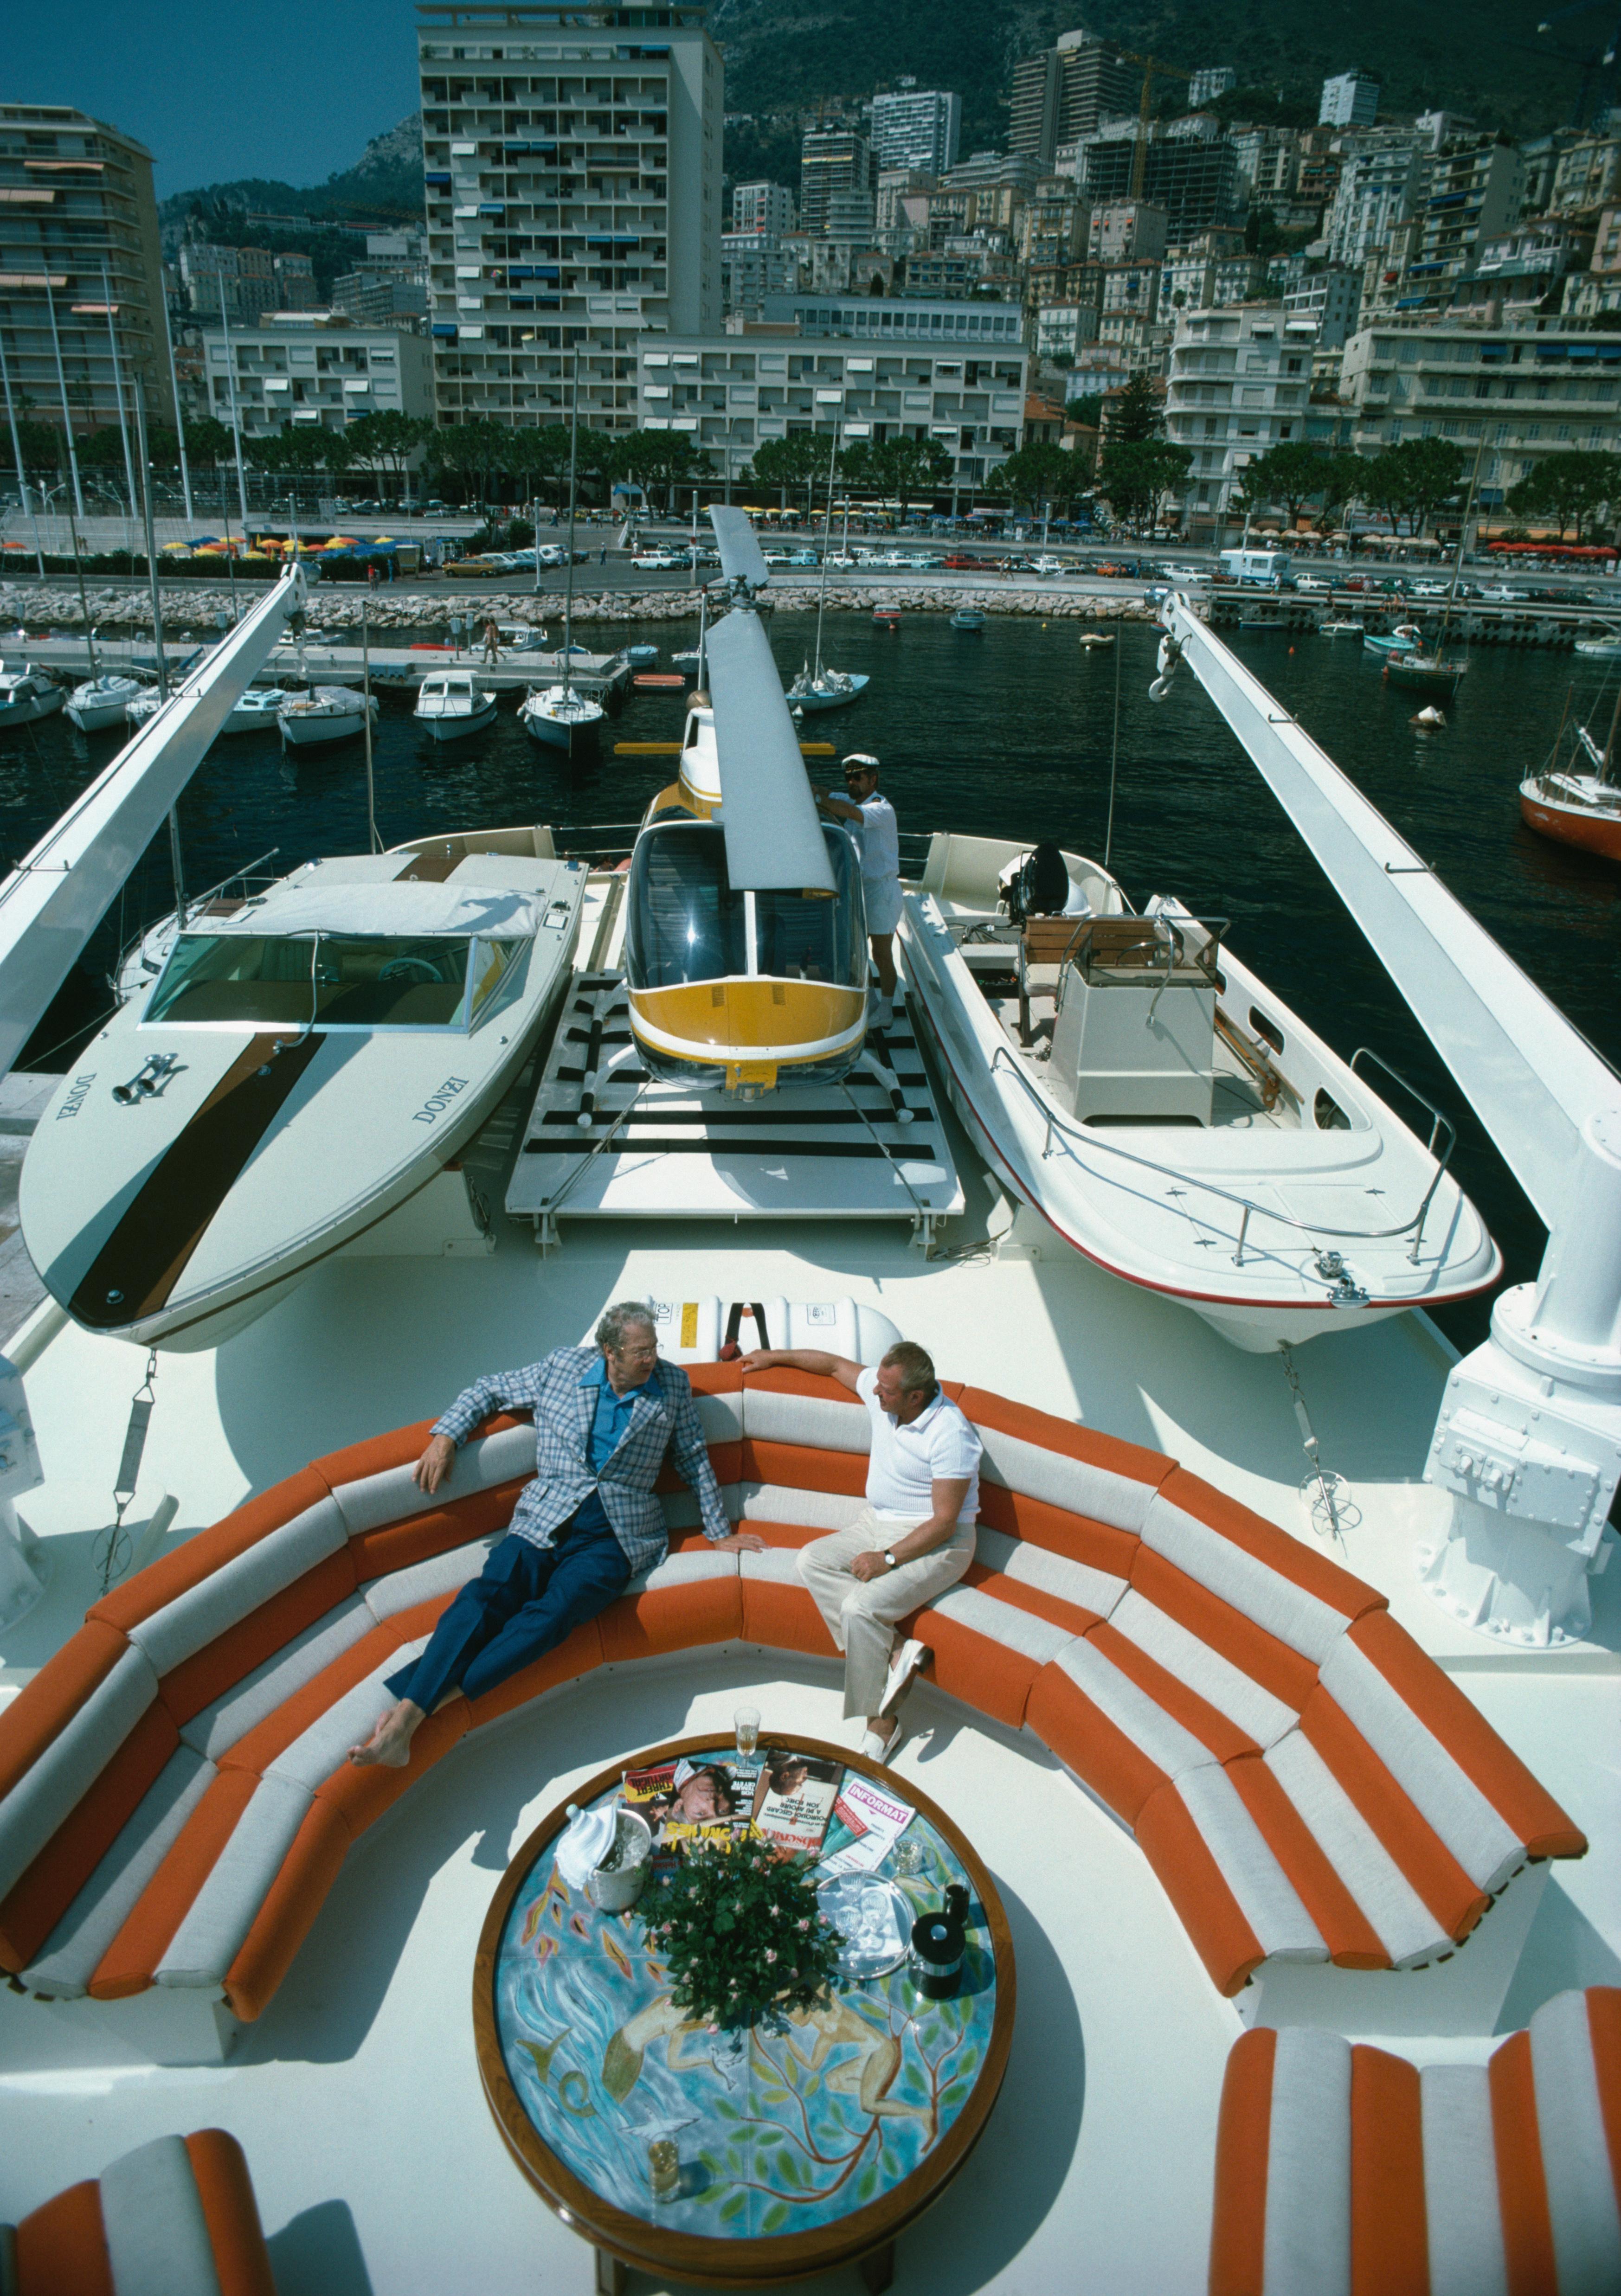 'Transport Buffs' 1981 Slim Aarons Limited Estate Edition Print 

A helicopter and two motor boats adorn the deck of a luxury yacht where Iowan businessman Roy J Carver and the Prince de Polignac are chatting in Monte Carlo harbour.

Produced from